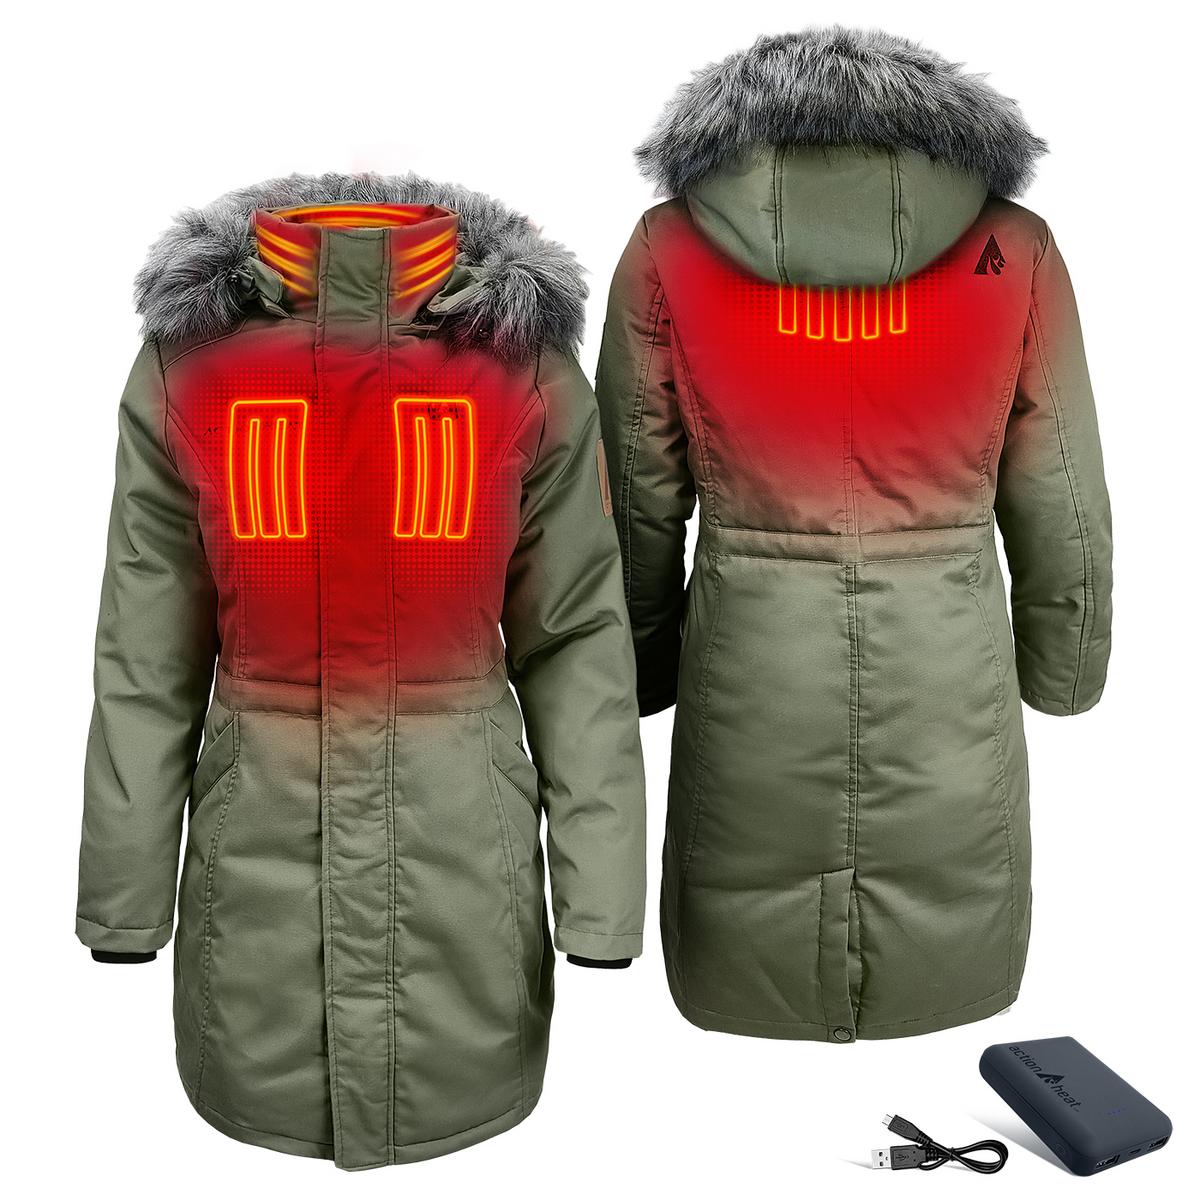 Time and Tru suits for men,sports,Christmas birthday gifts,Outdoor Warm  Clothing Heated For Riding Skiing Fishing Charging Via Heated 